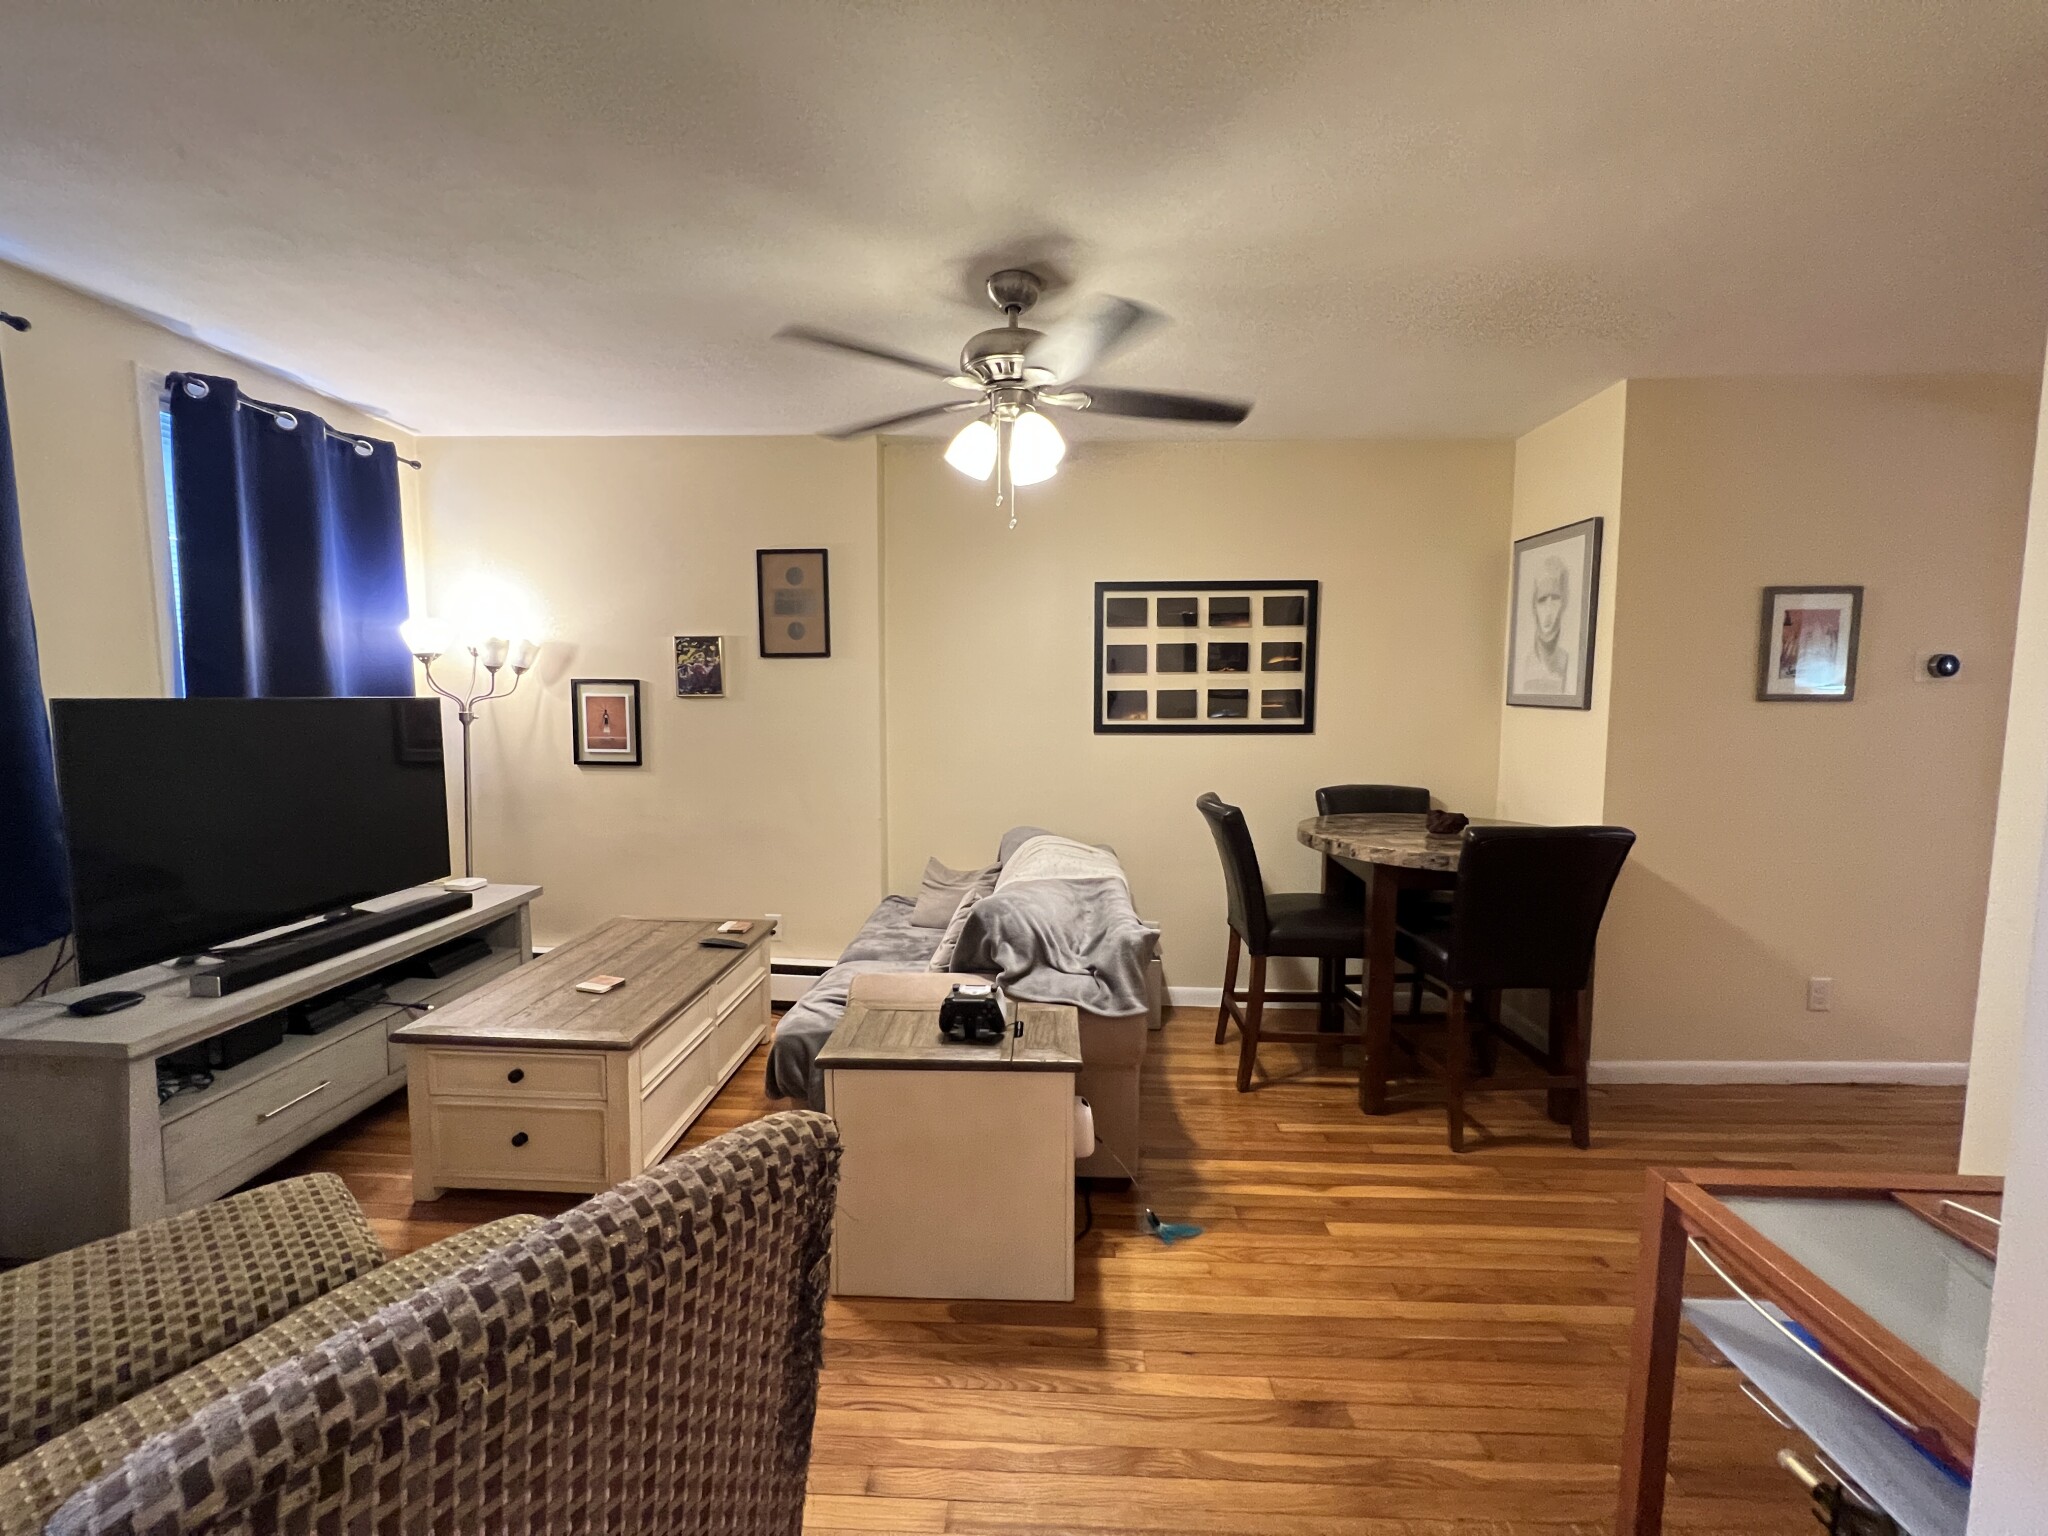 Photos of apartment on Cross St.,Somerville MA 02145